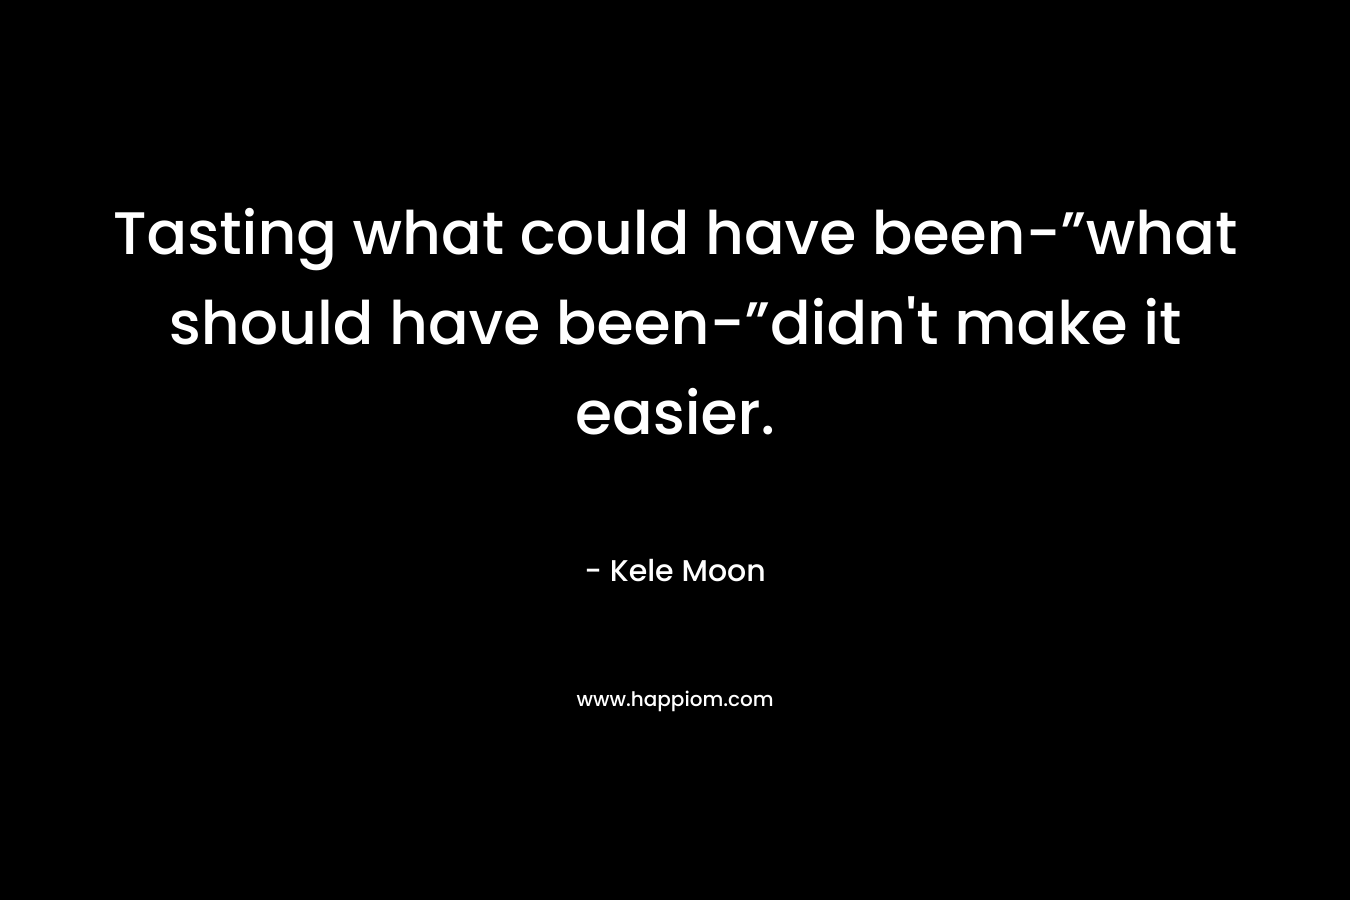 Tasting what could have been-”what should have been-”didn’t make it easier. – Kele Moon